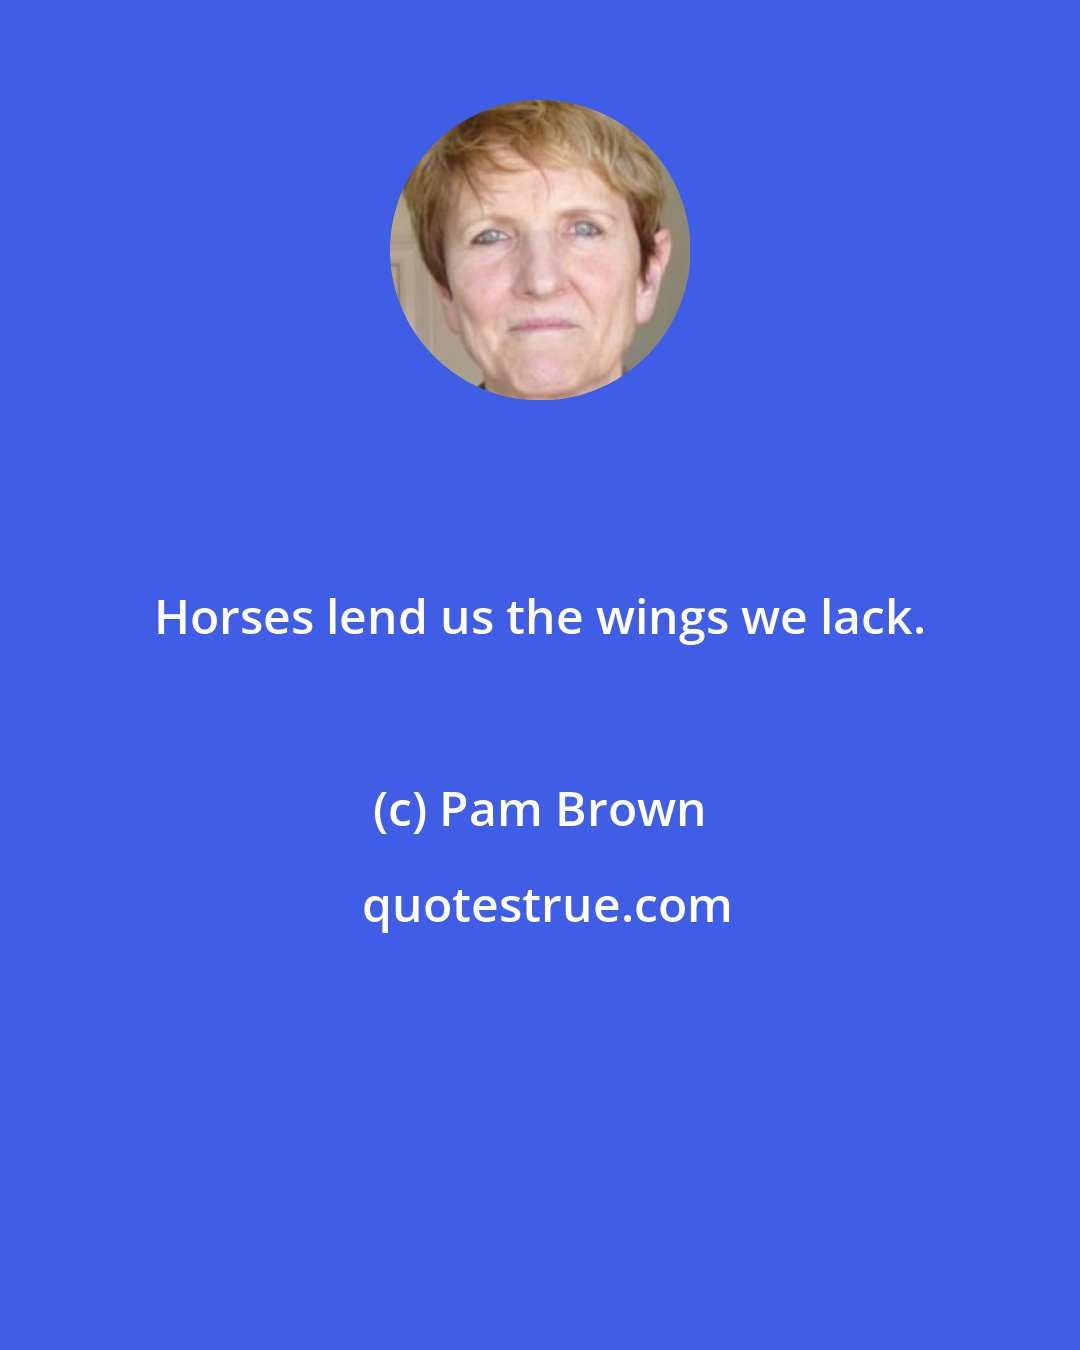 Pam Brown: Horses lend us the wings we lack.